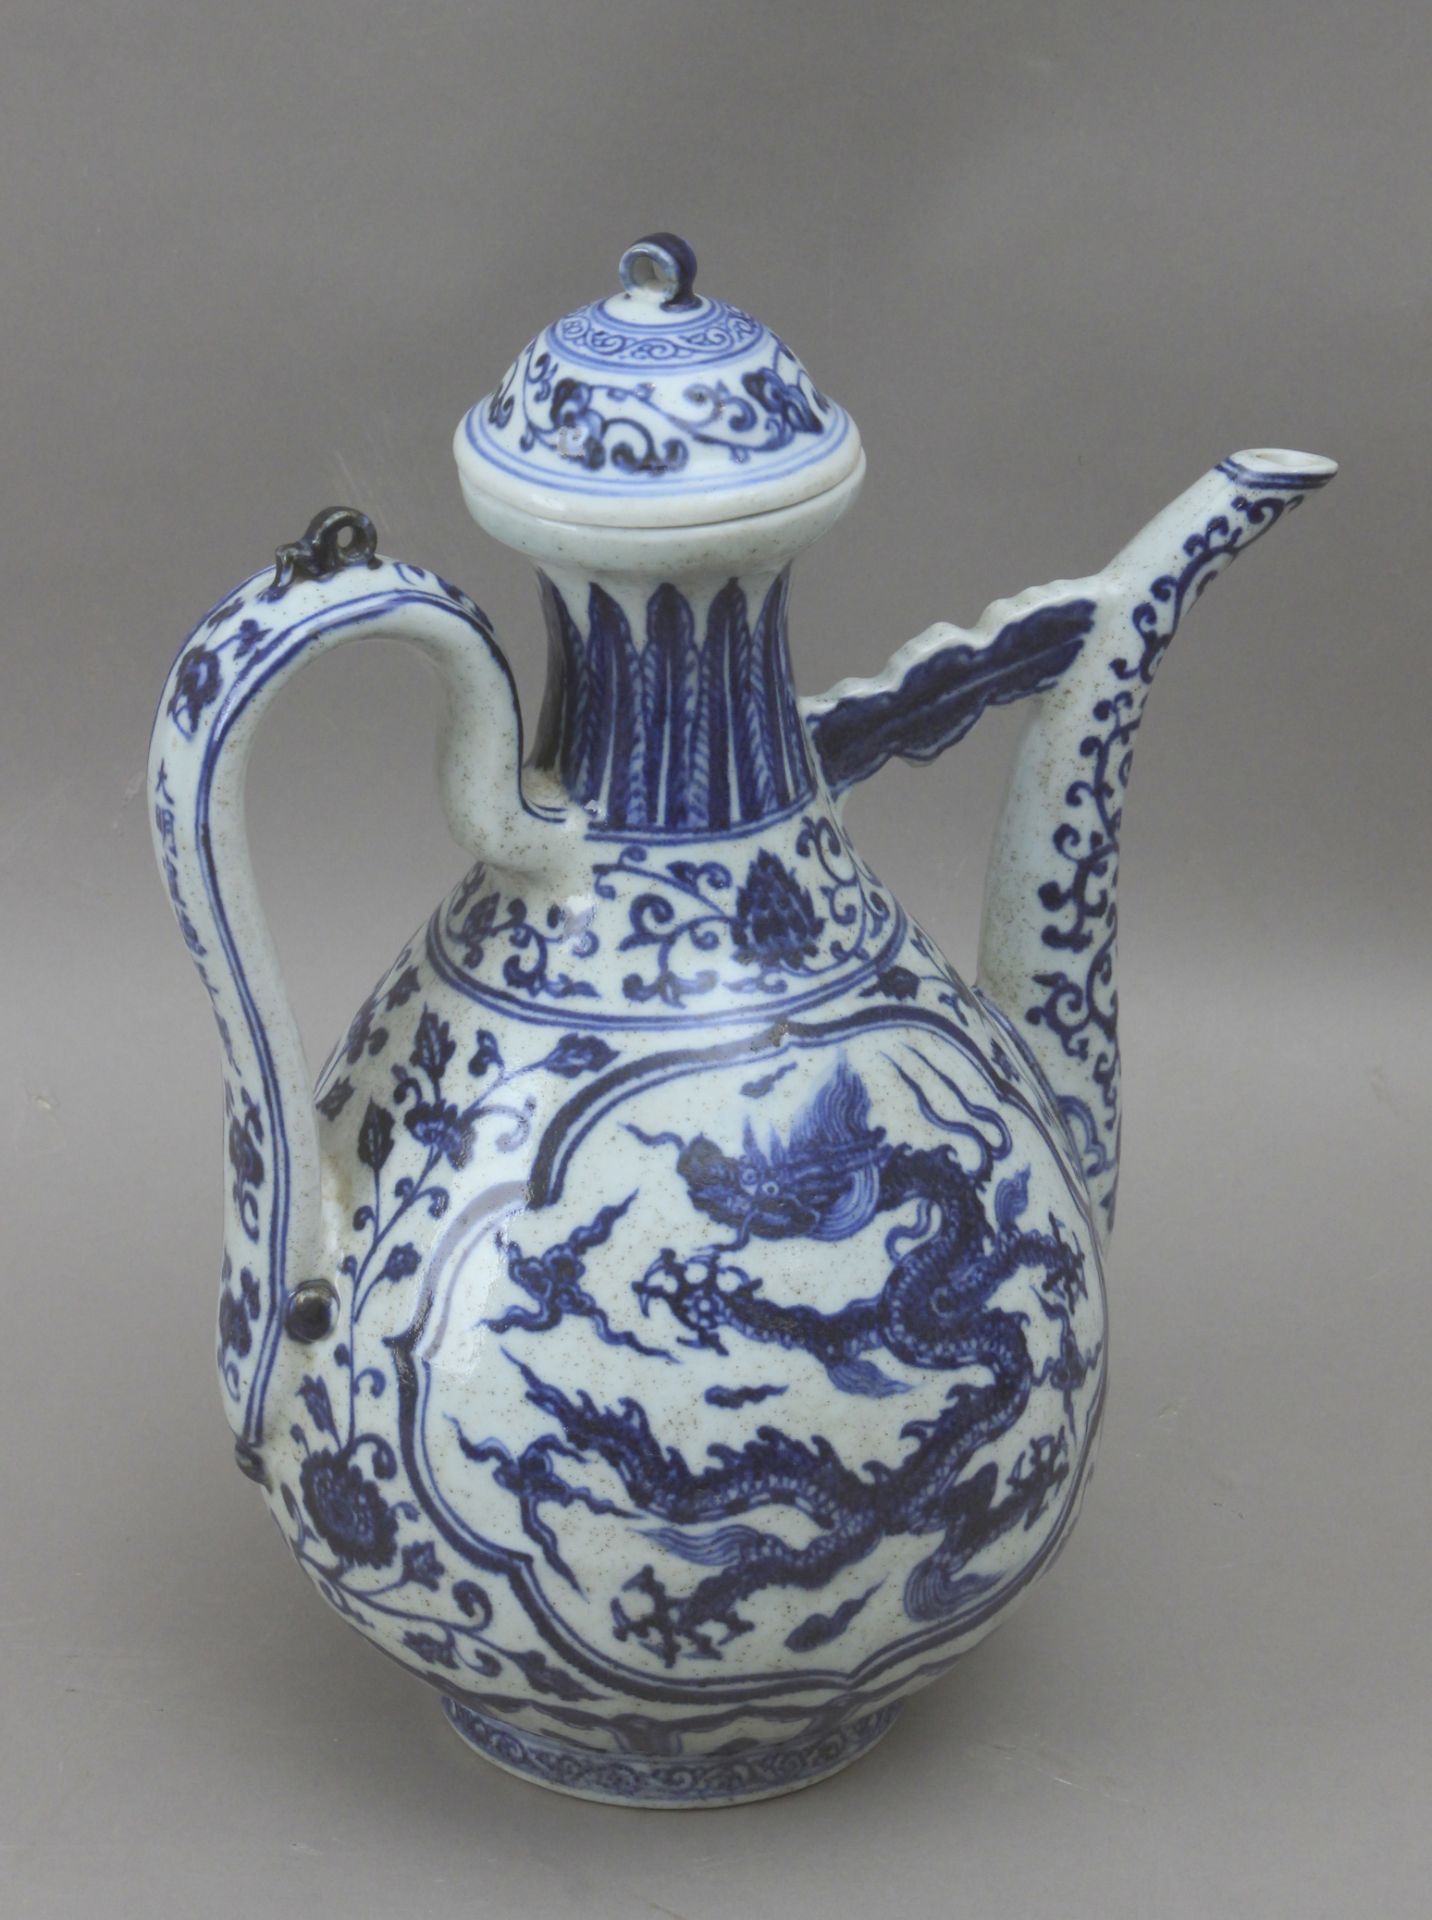 A 19th century Chinese wine pitcher from Qing dynasty - Image 4 of 4